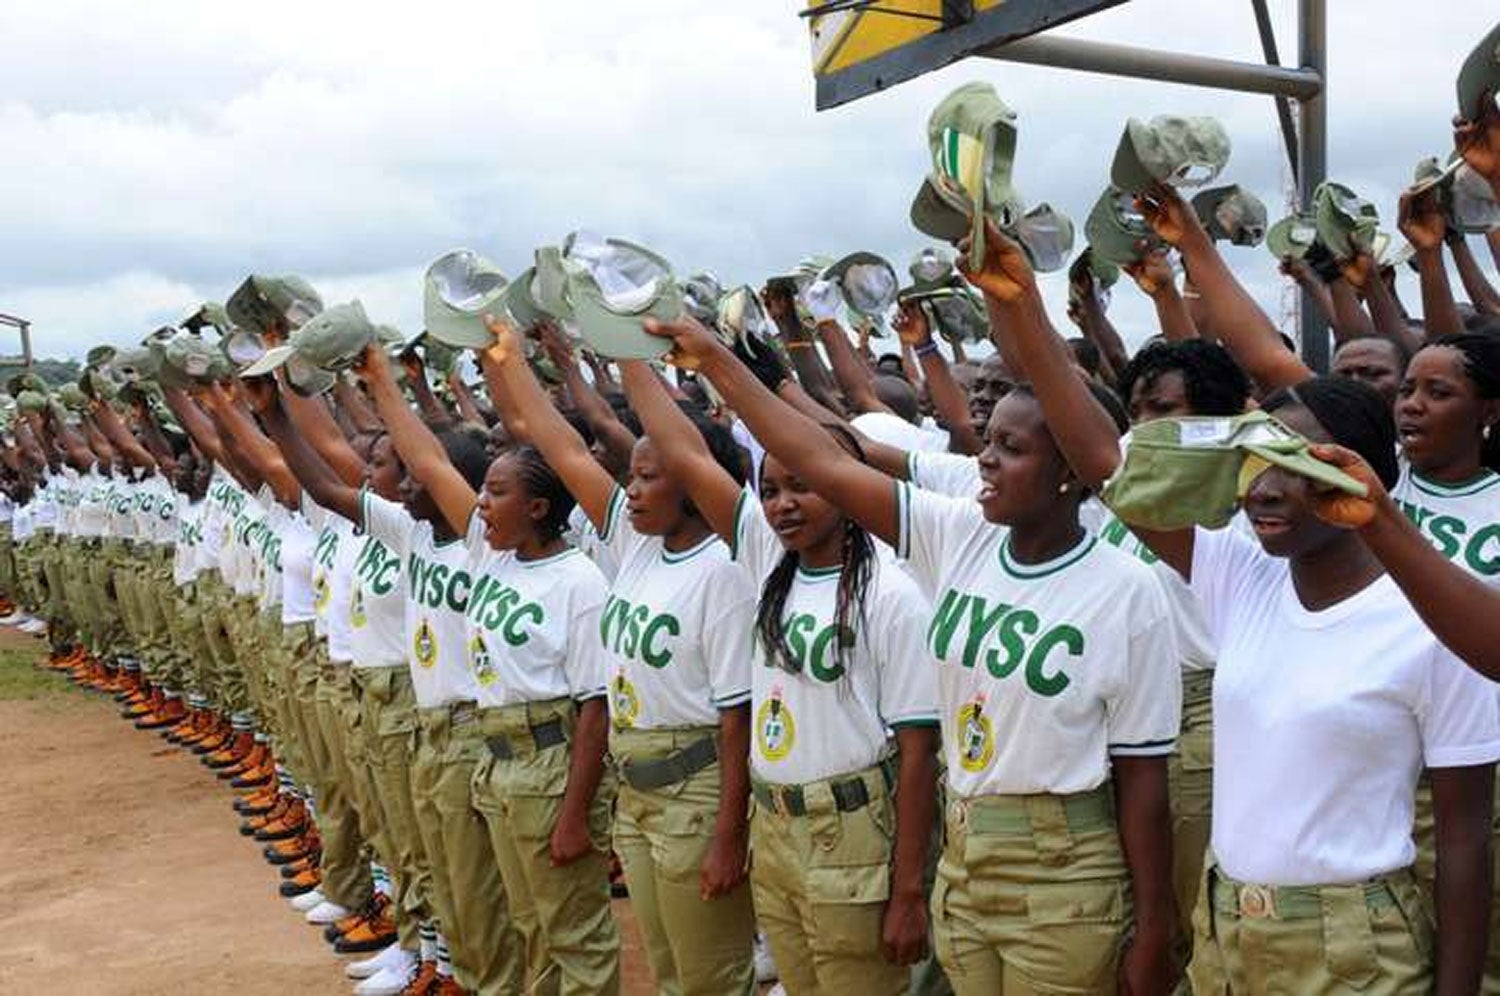 NYSC corps members